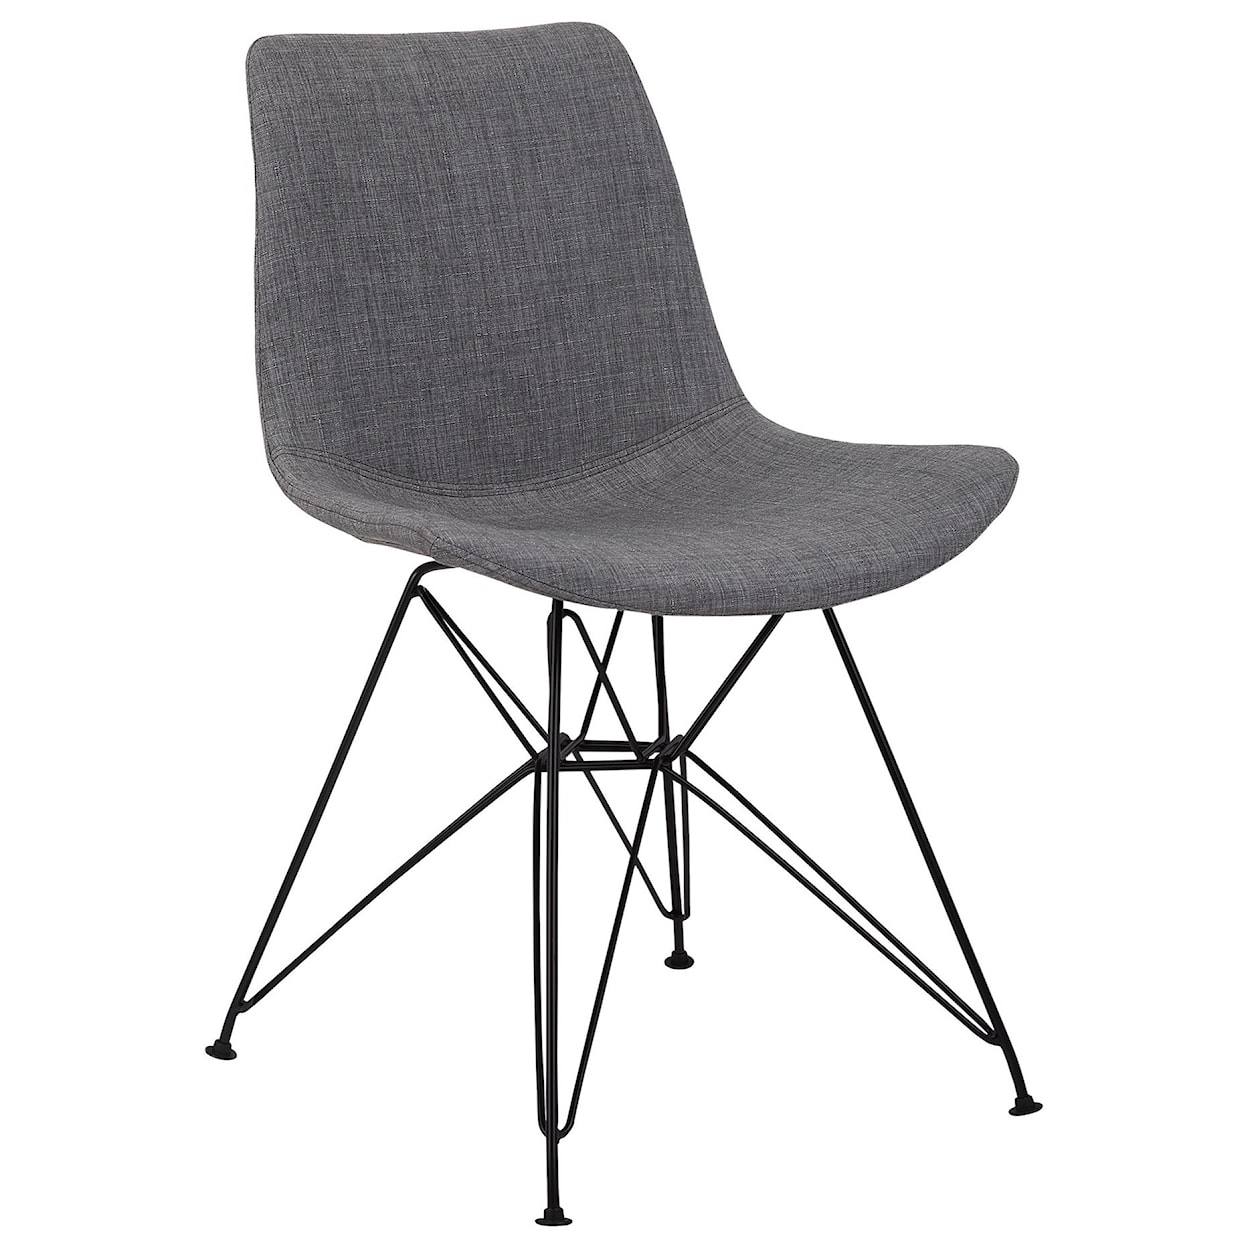 Armen Living Palmetto Contemporary Dining Chair in Charcoal